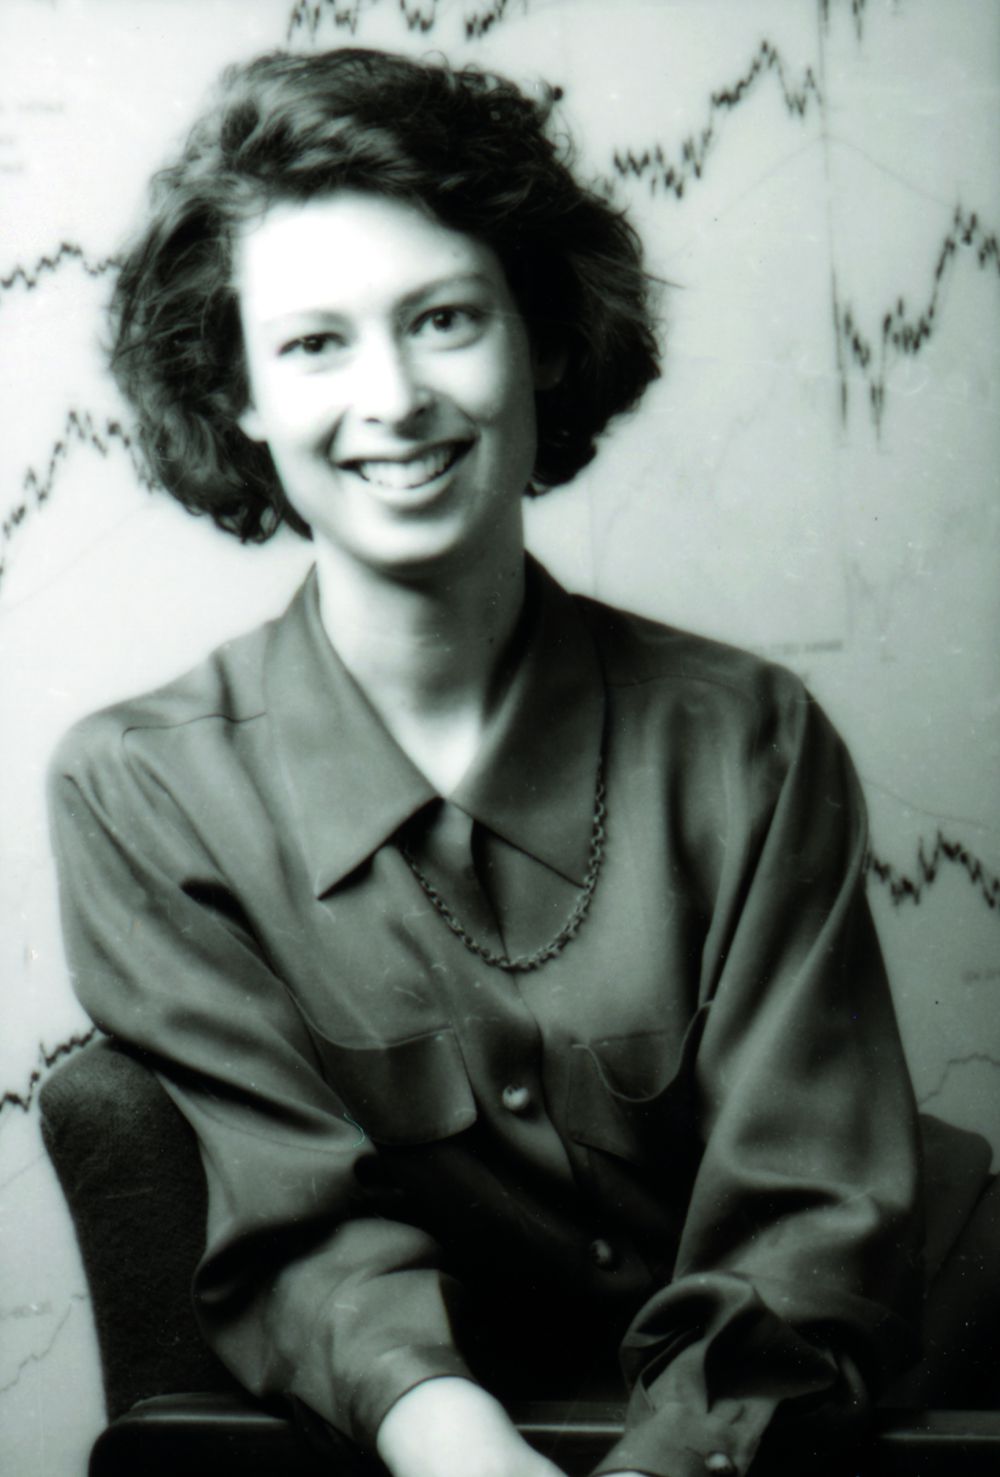 The Most Powerful Women in Finance: No. 2, Abigail Johnson, Fidelity  Investments